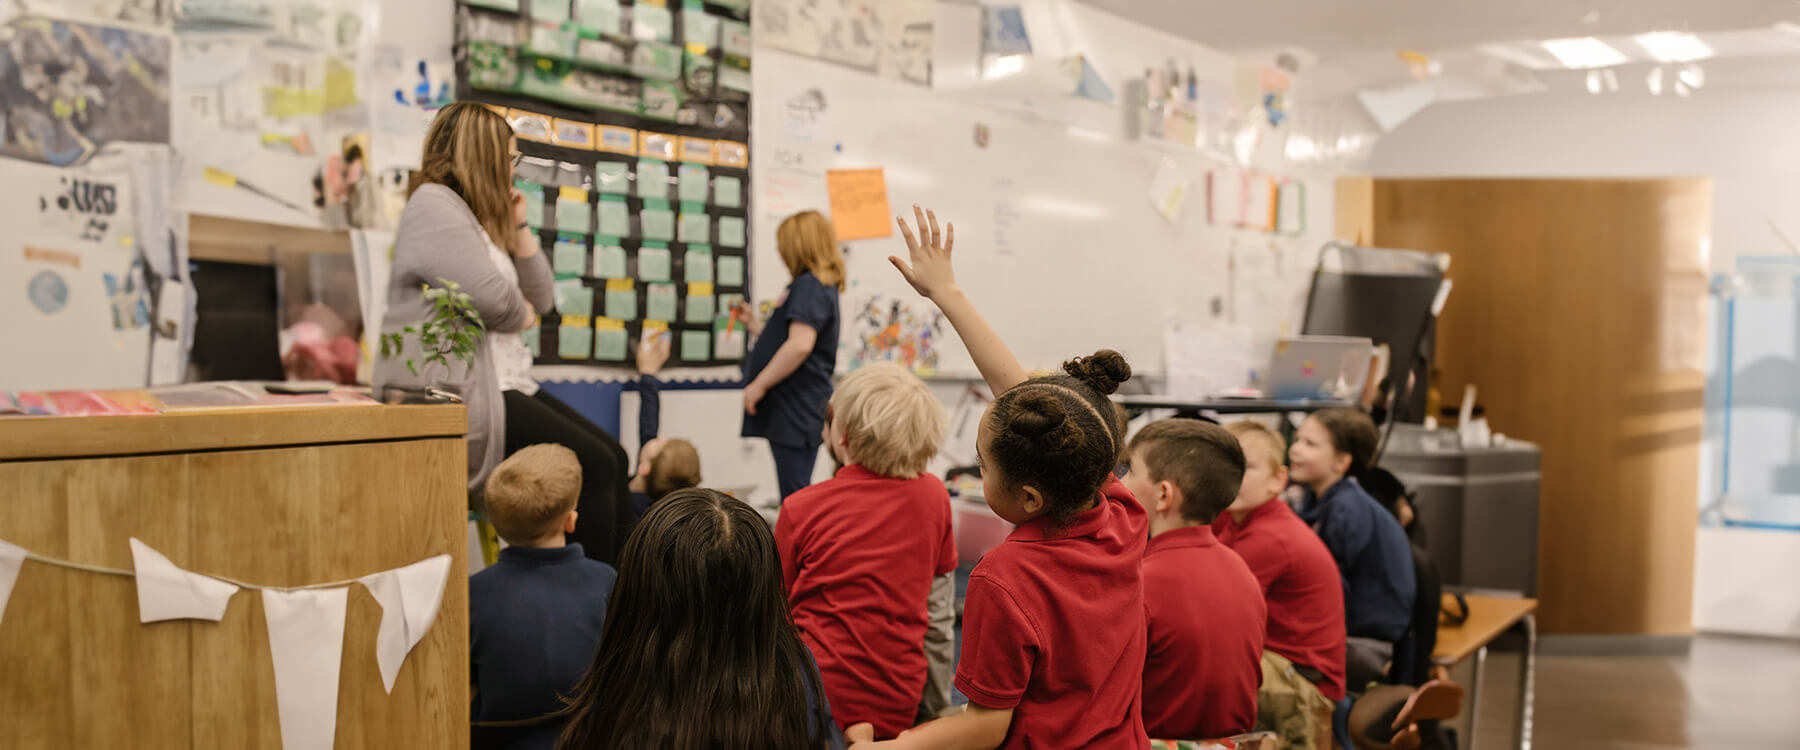 An elementary student raises their hand while another writes on a whiteboard observed by a teacher and peers.